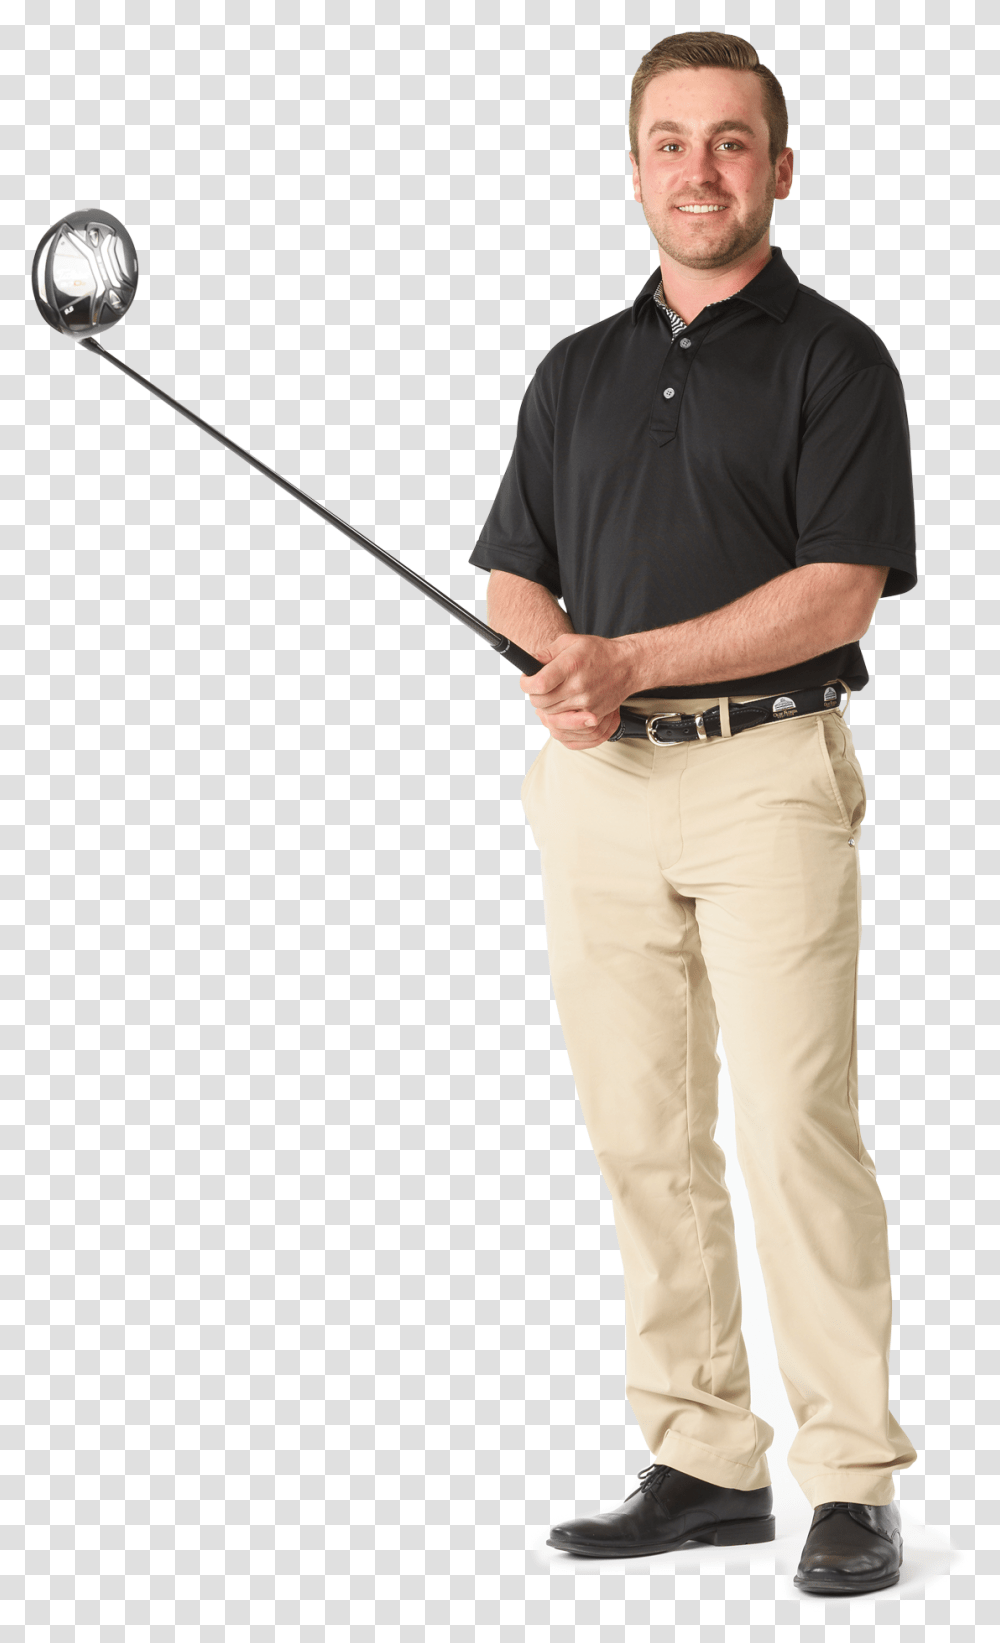 Golfer, Person, Human, Outdoors Transparent Png